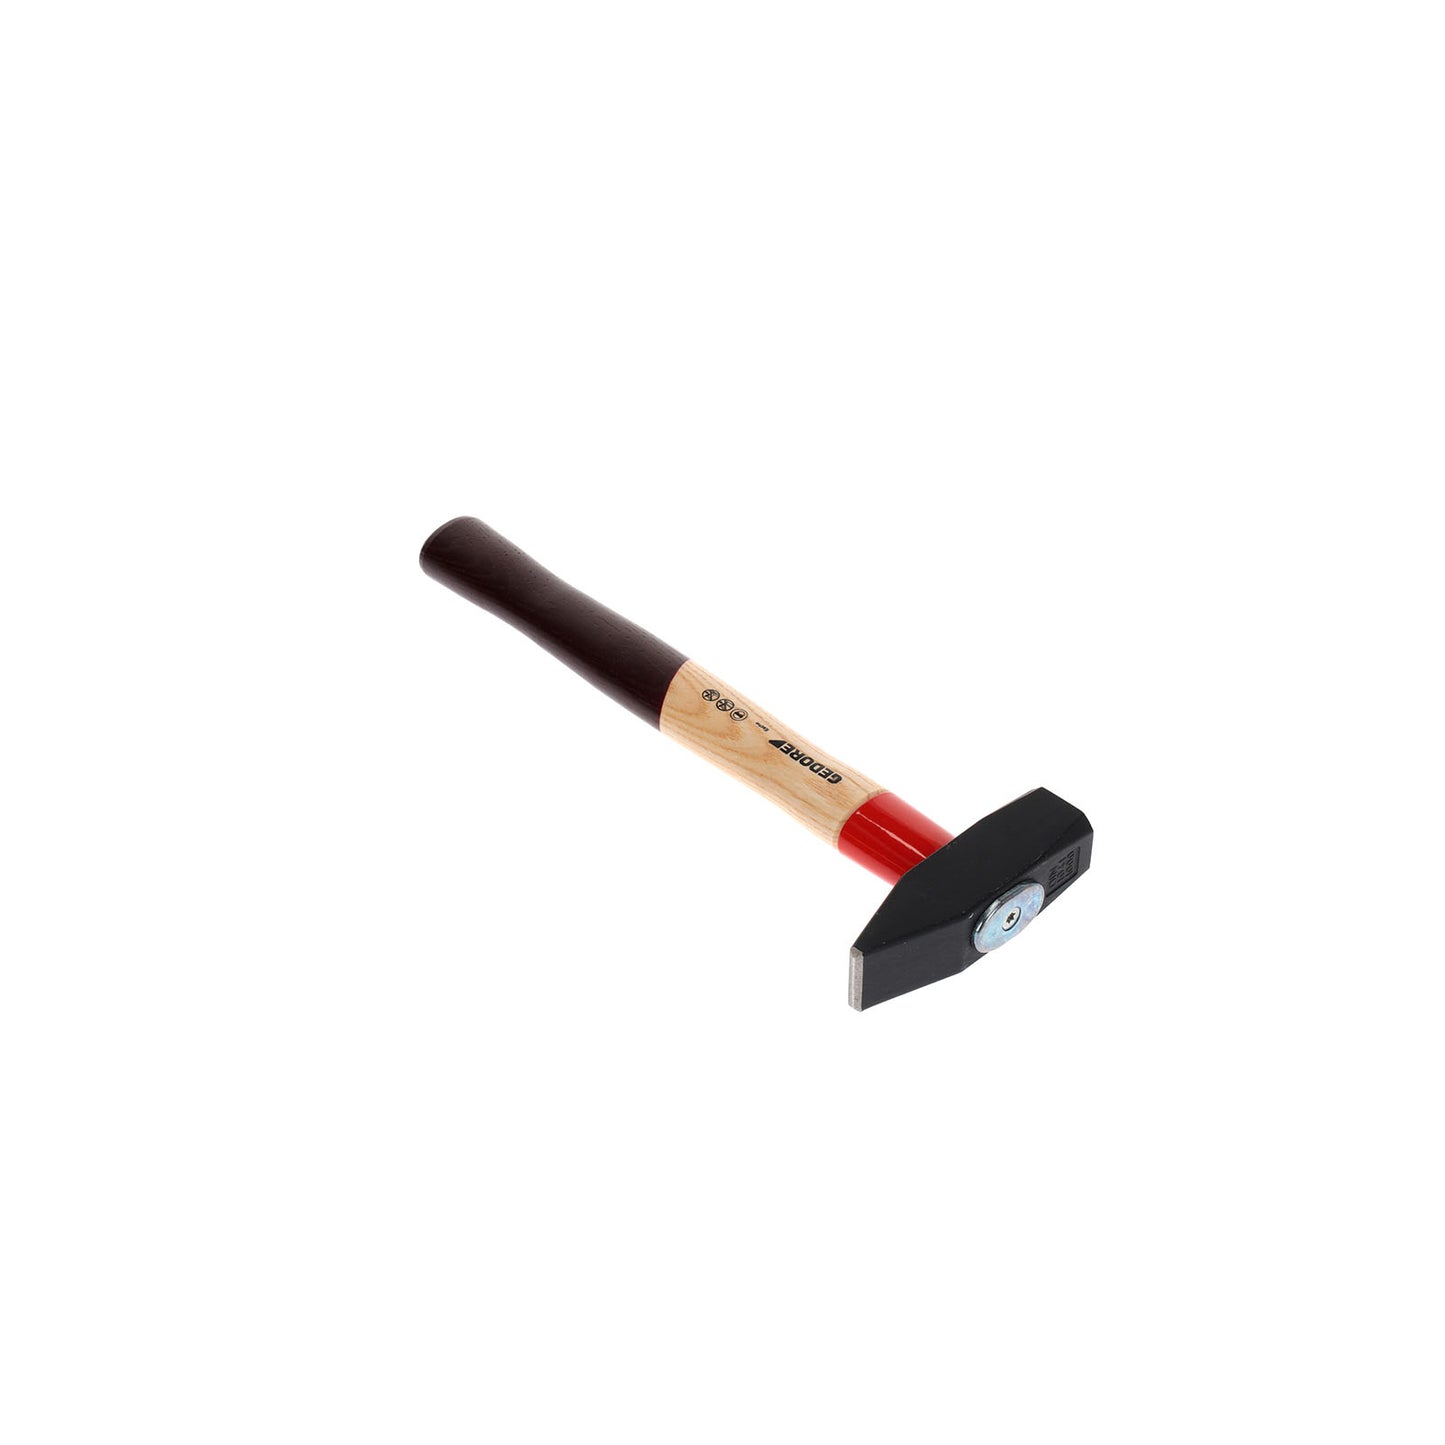 GEDORE 600 E-1000 - ROTBAND assembly hammer 1Kg (8582500)